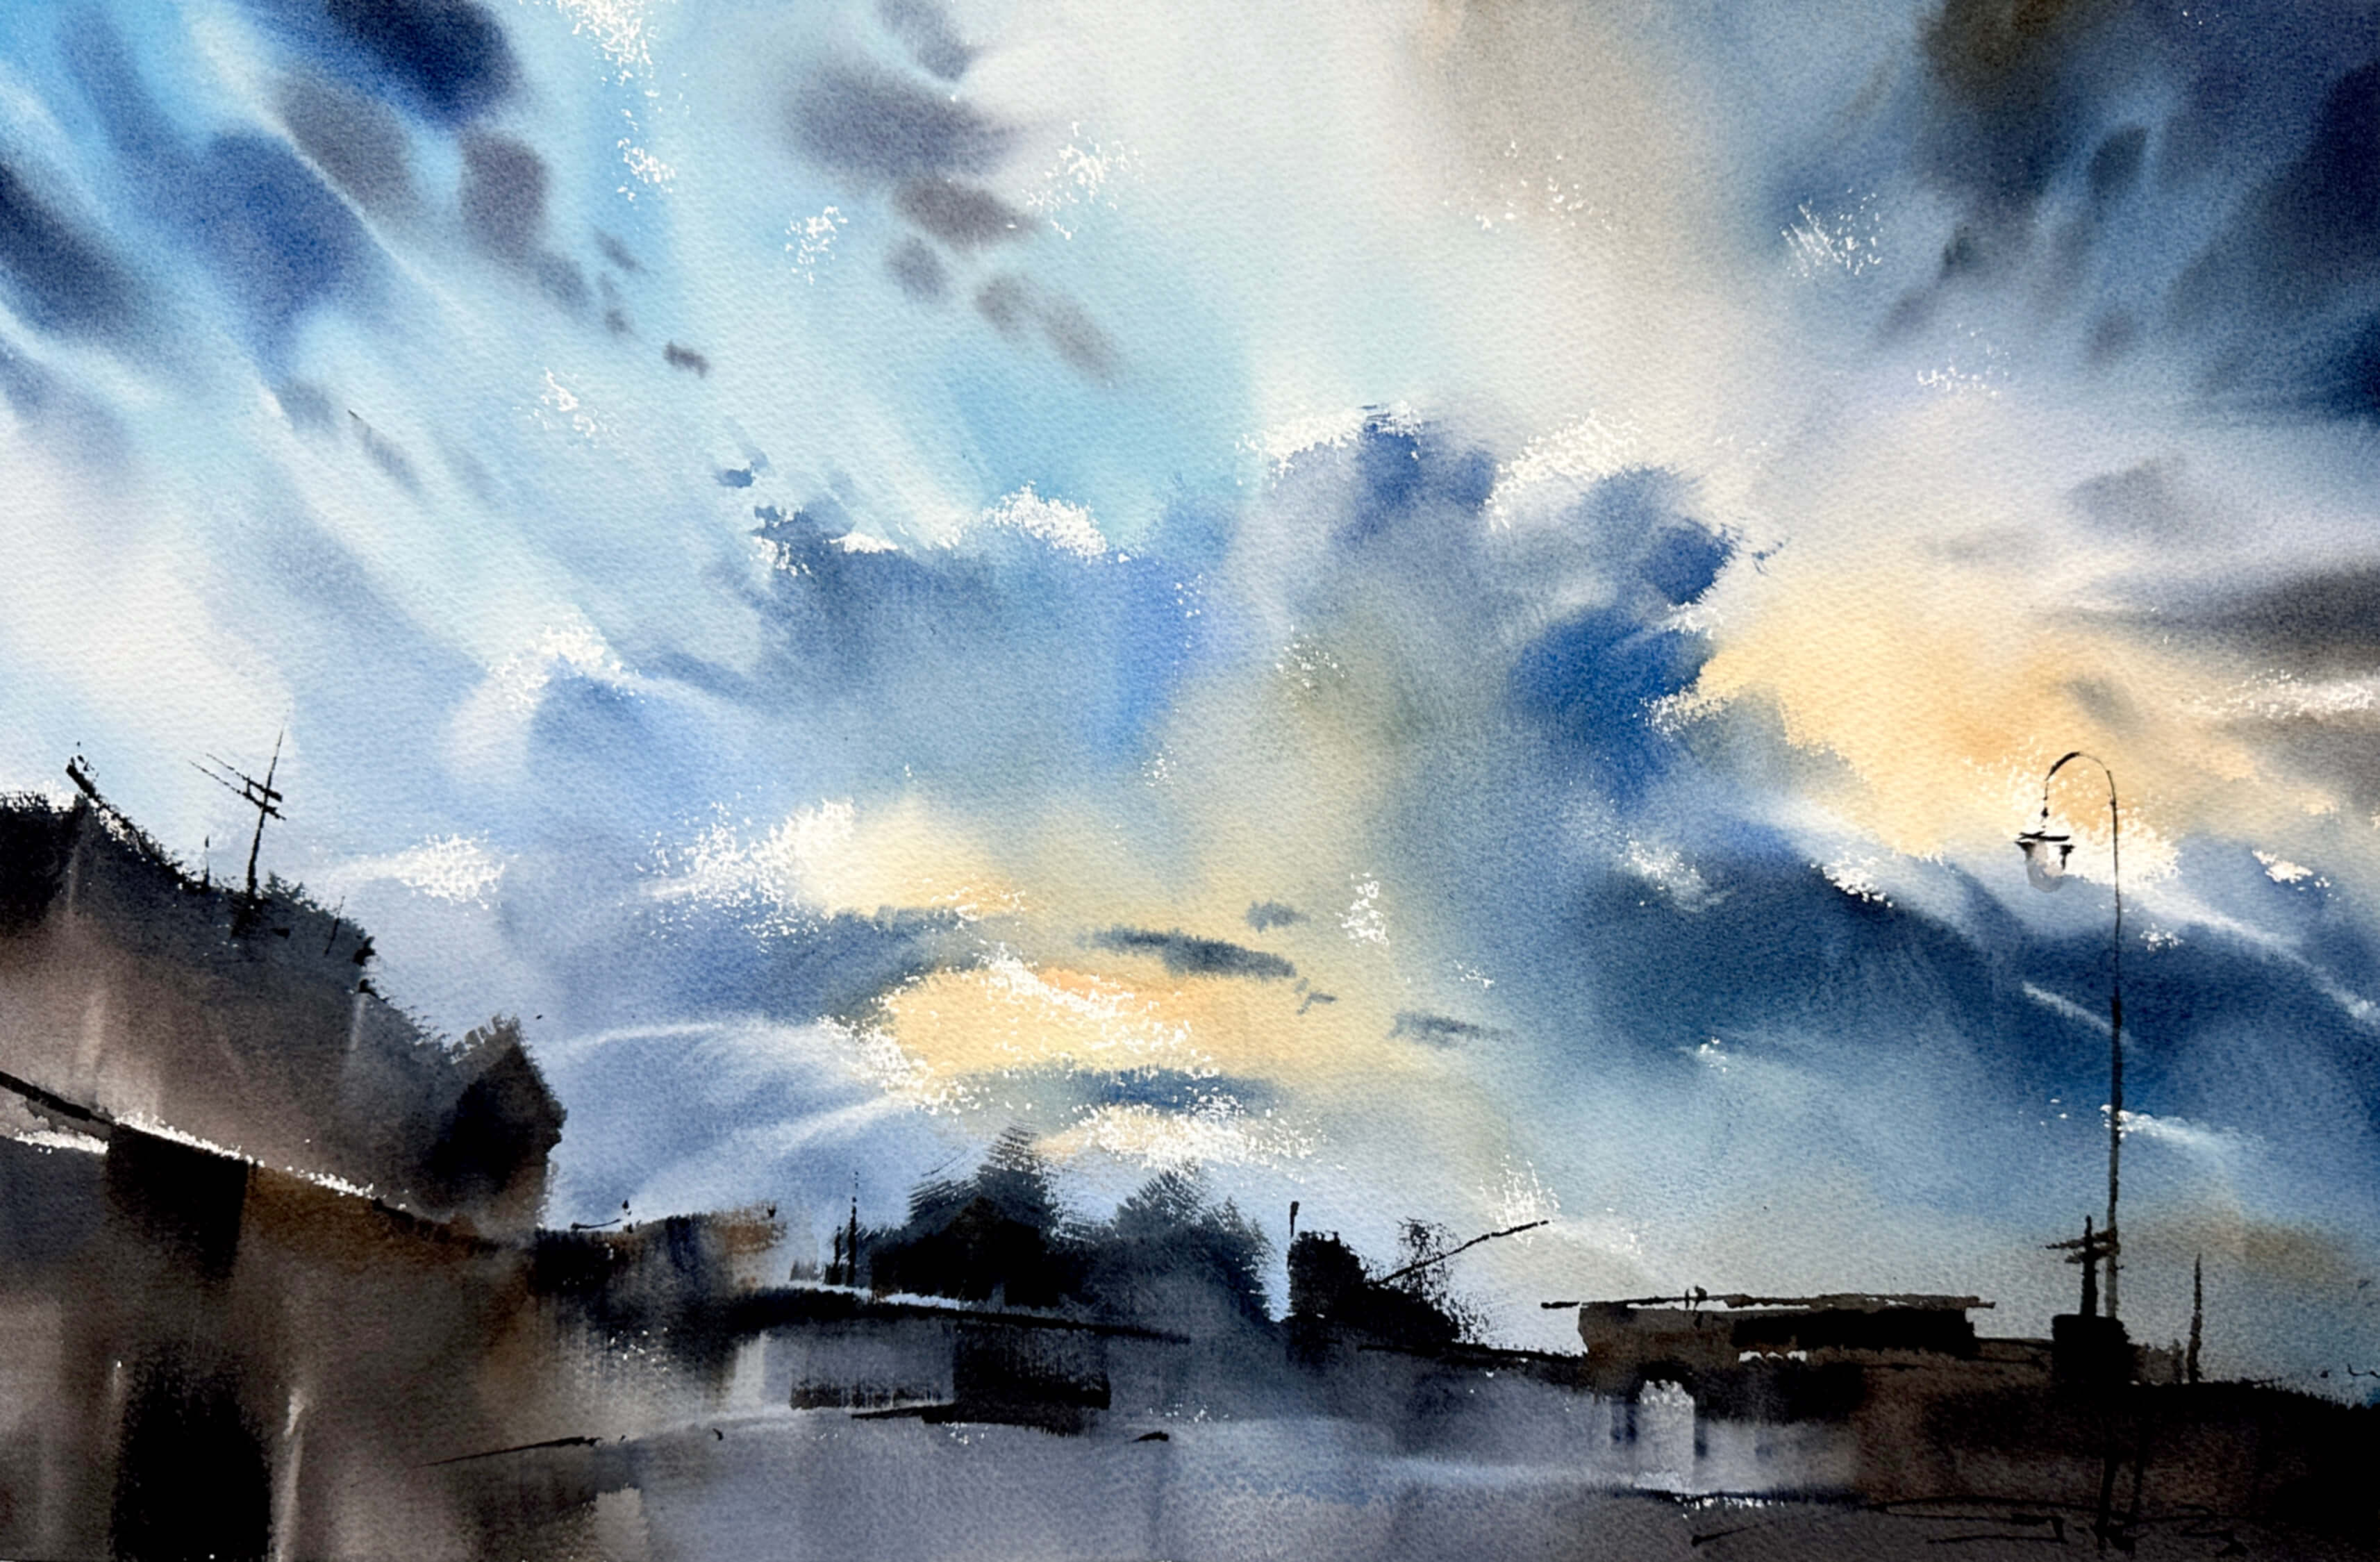 Winter sky painting by Micheal Solovyev - painting holidays France.